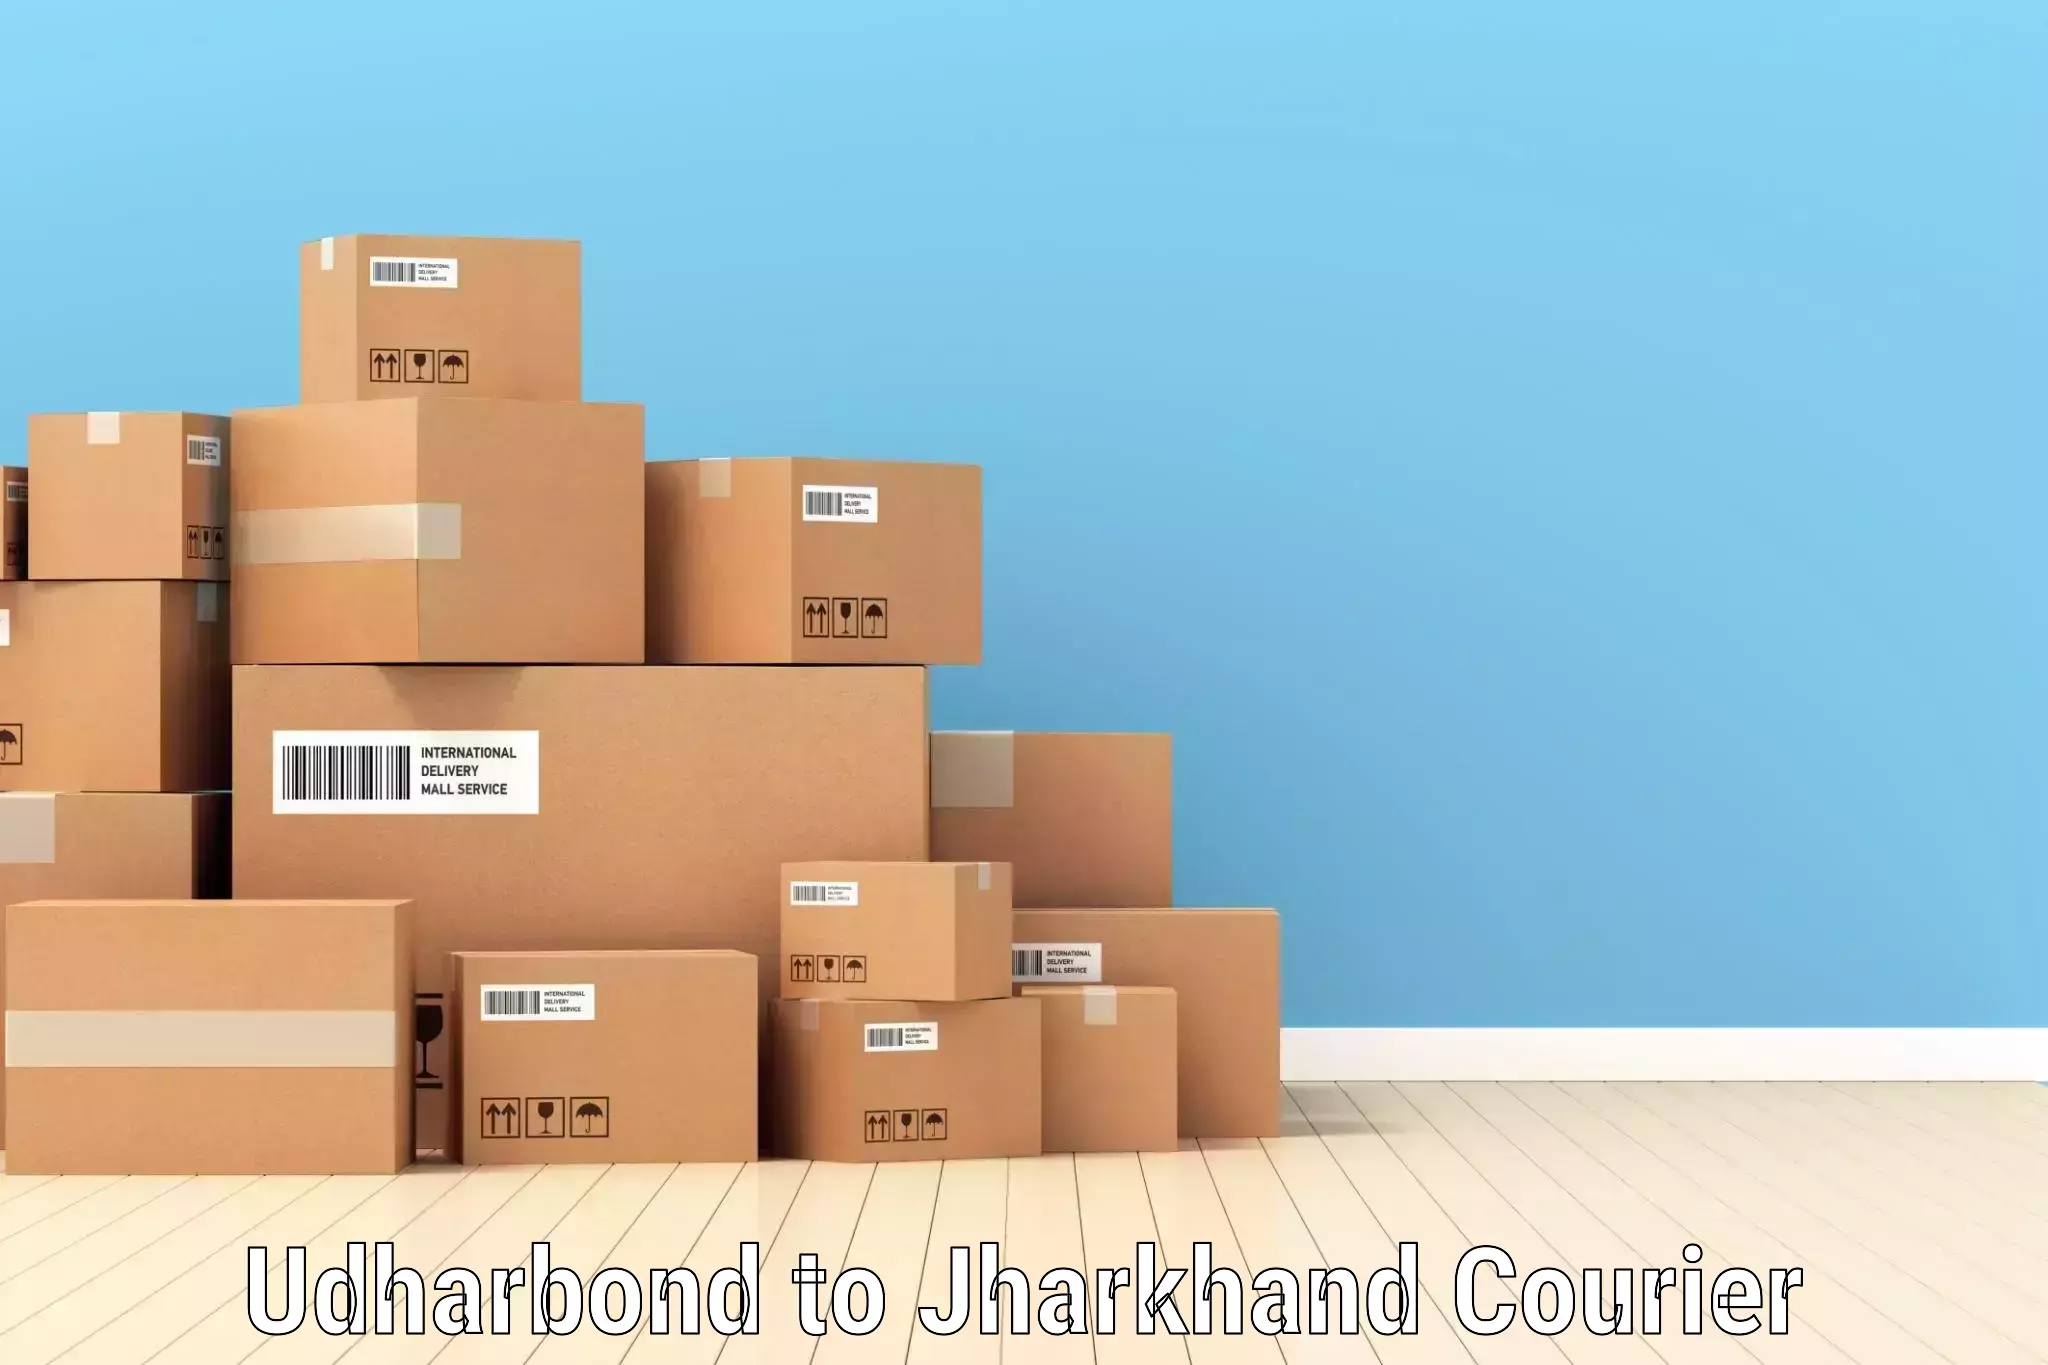 Lightweight parcel options Udharbond to Jharkhand